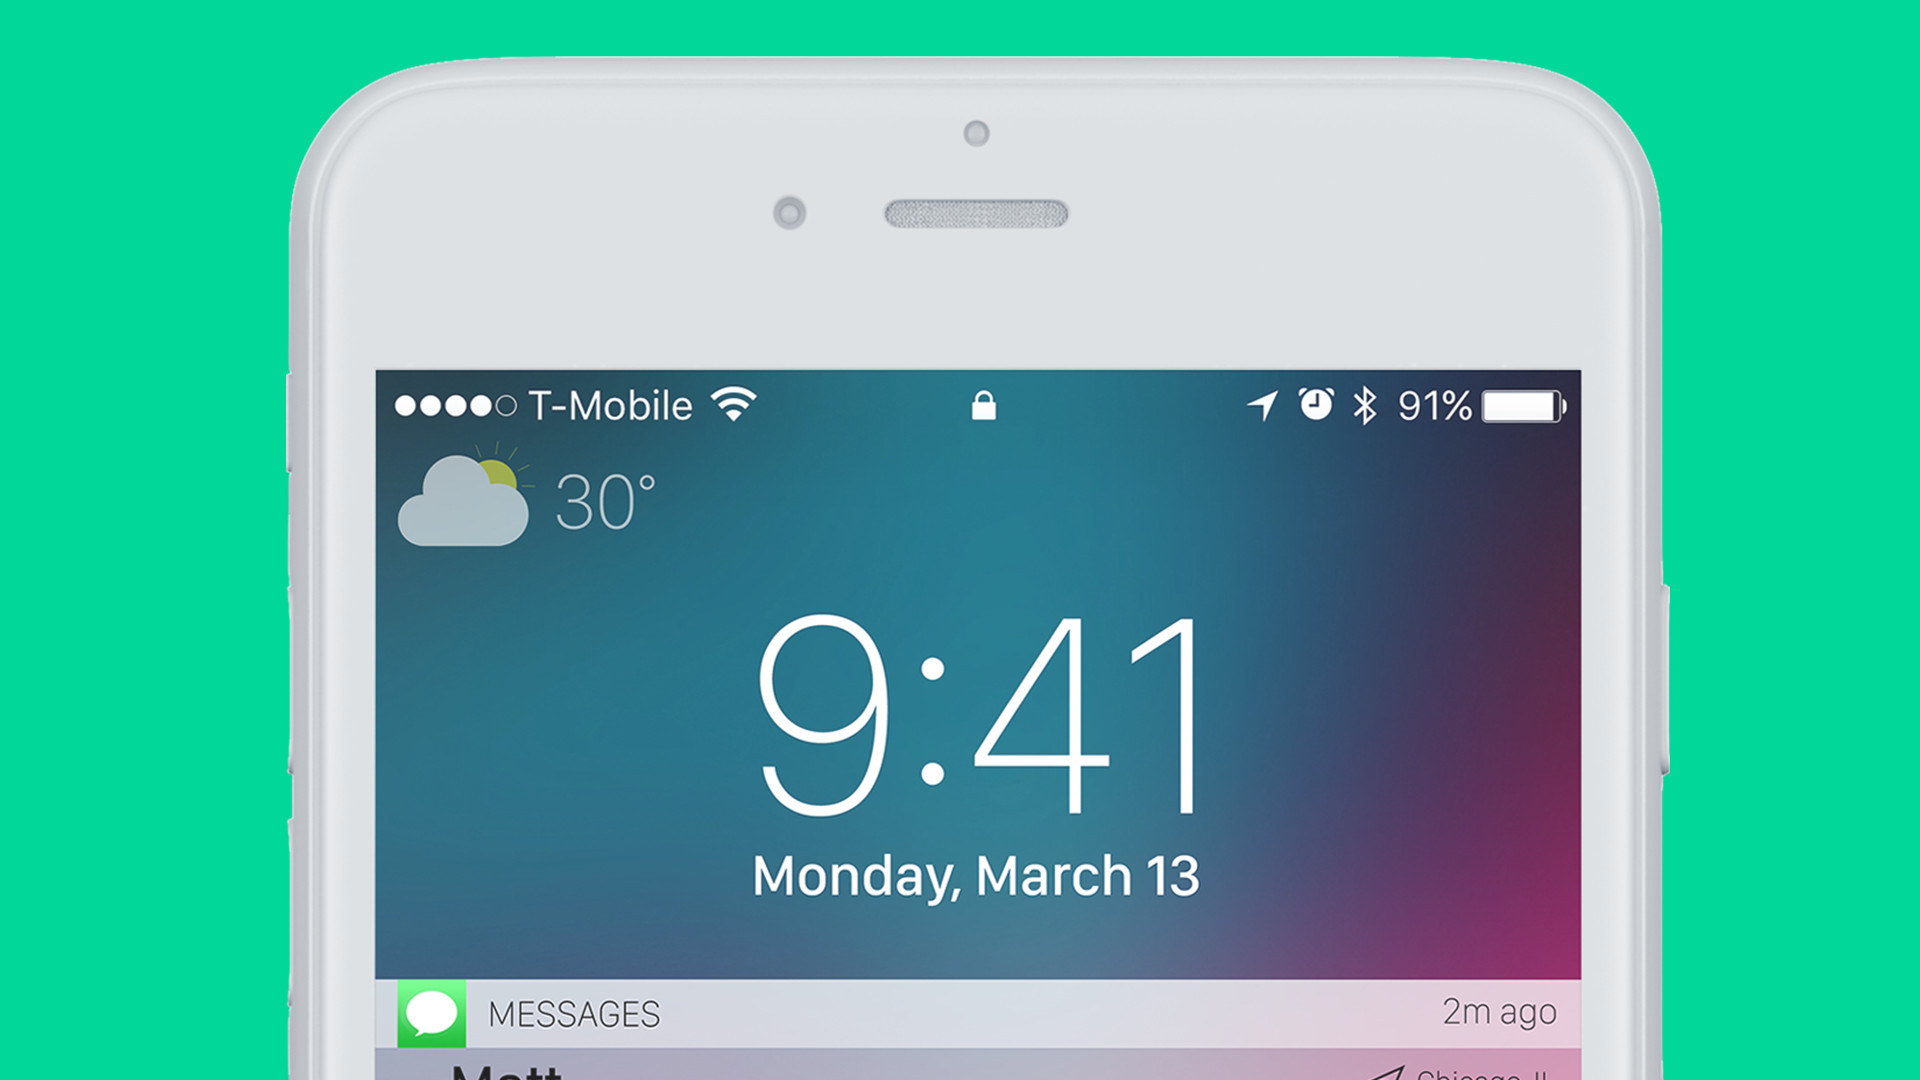 1920x1080 iOS complications could bring similar functionality to your Lock screen,  like weather previews along with the current temperature and conditions.